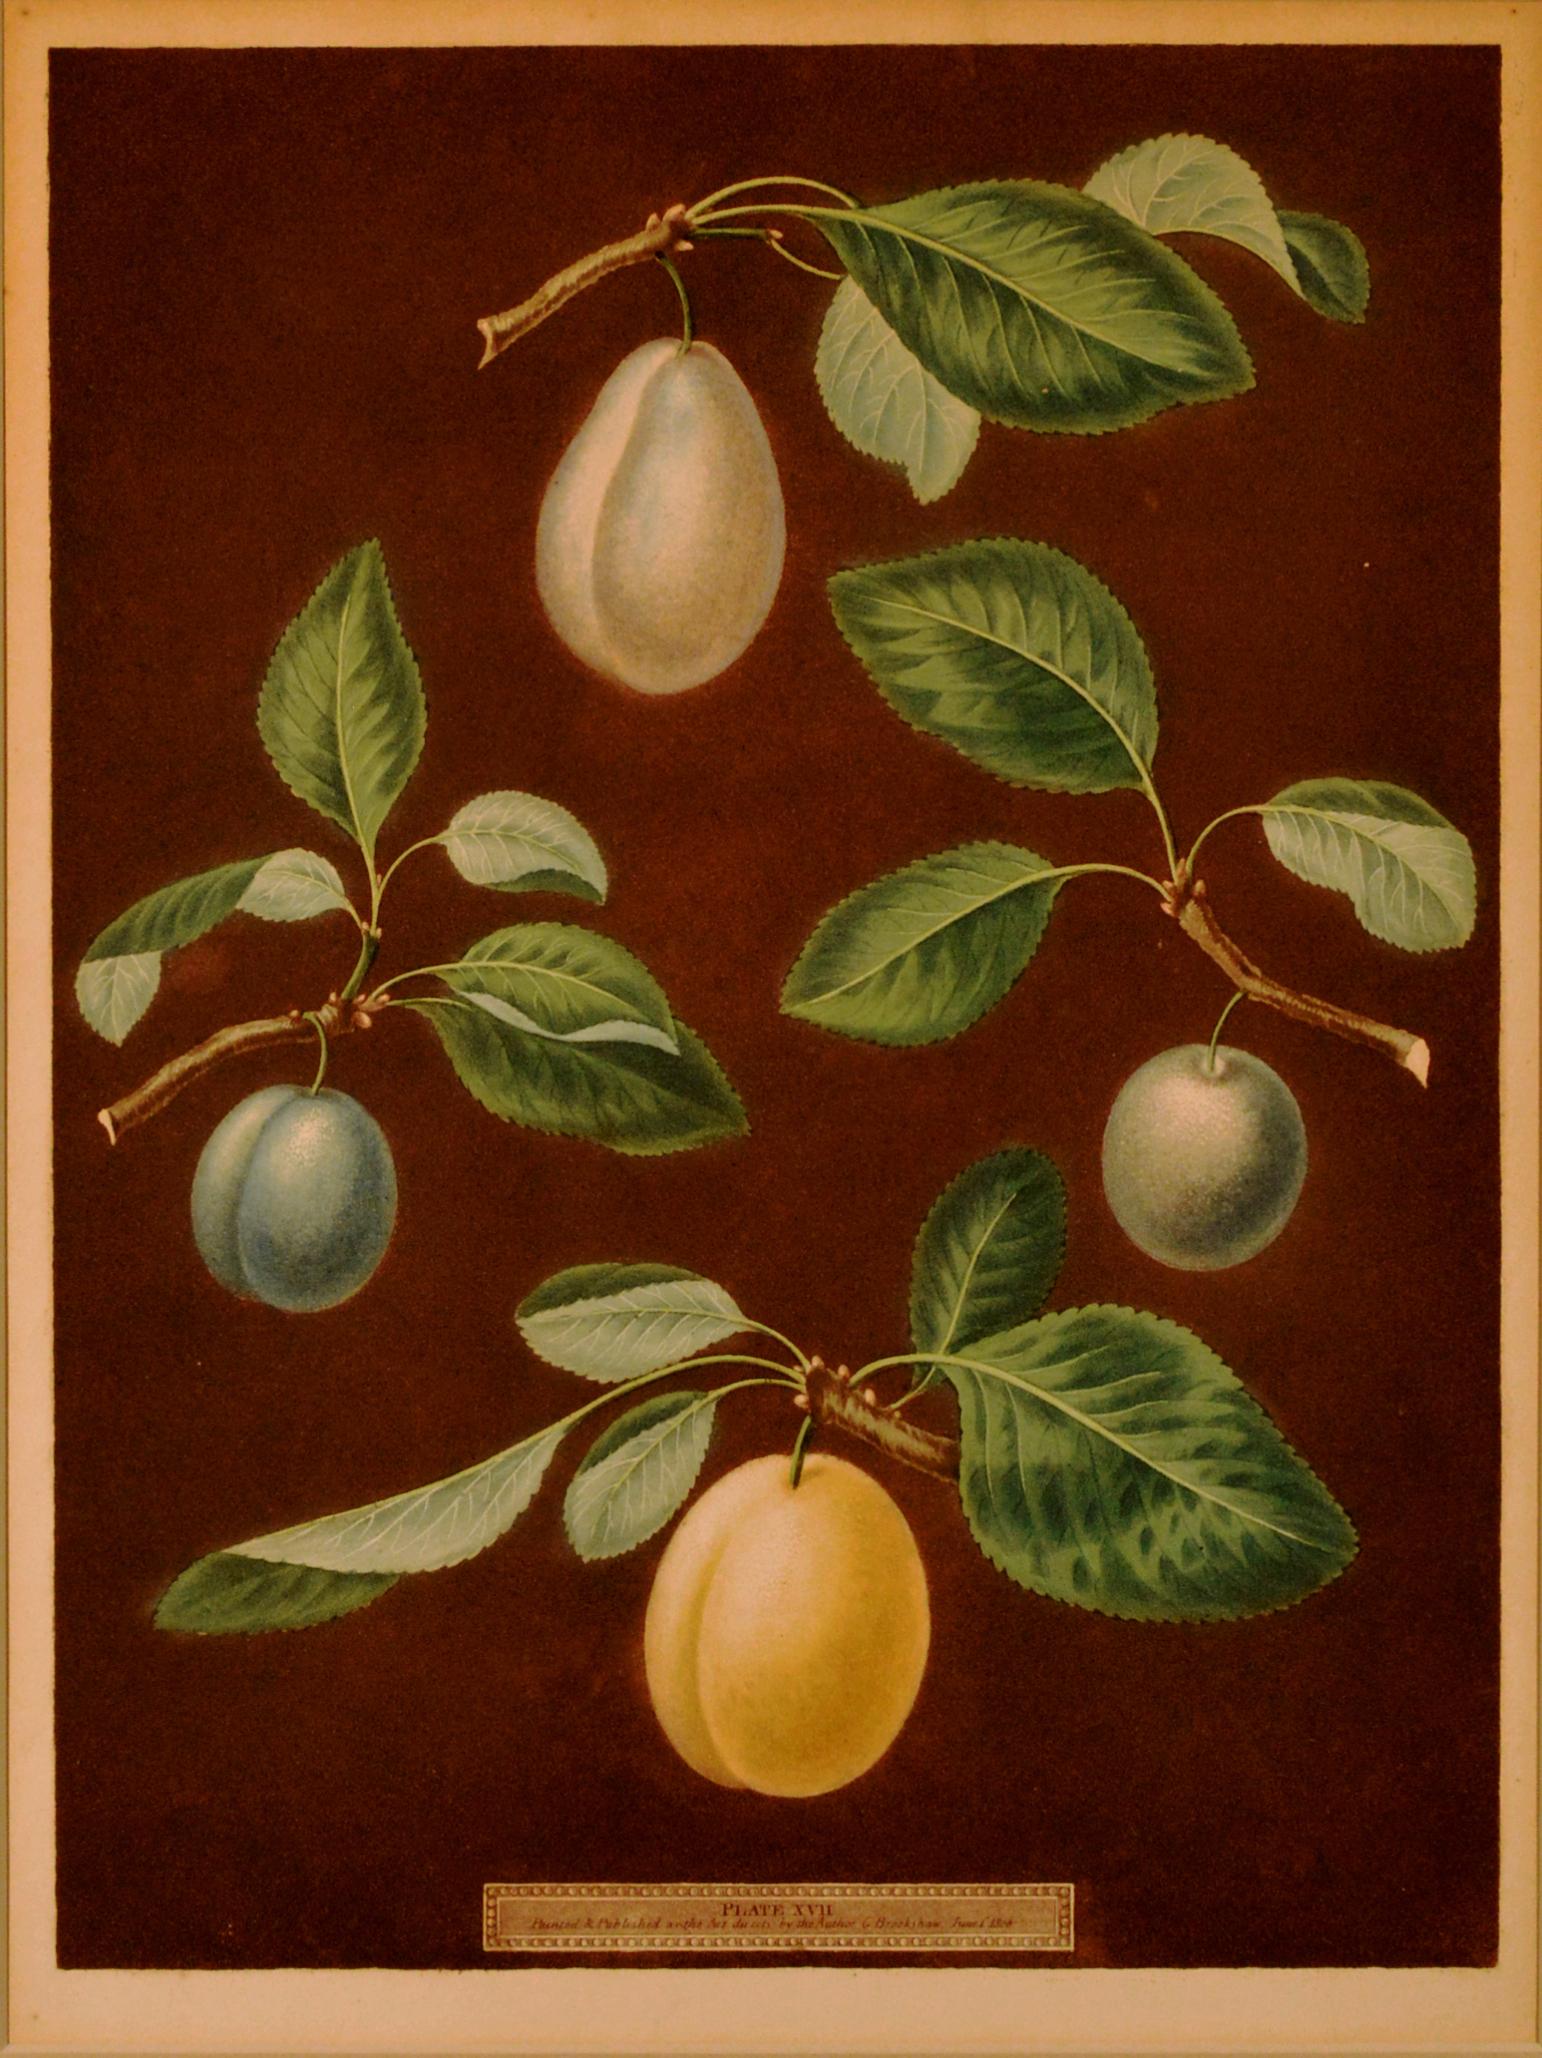 George Brookshaw print of four varieties of plums,
Plate XVII, from Natural History Art, Botanical, Fruit, Brookshaw, Pomona Britannica,
1806

The applied publication legion below and center-reads Plate XVII, painted & published as the Act